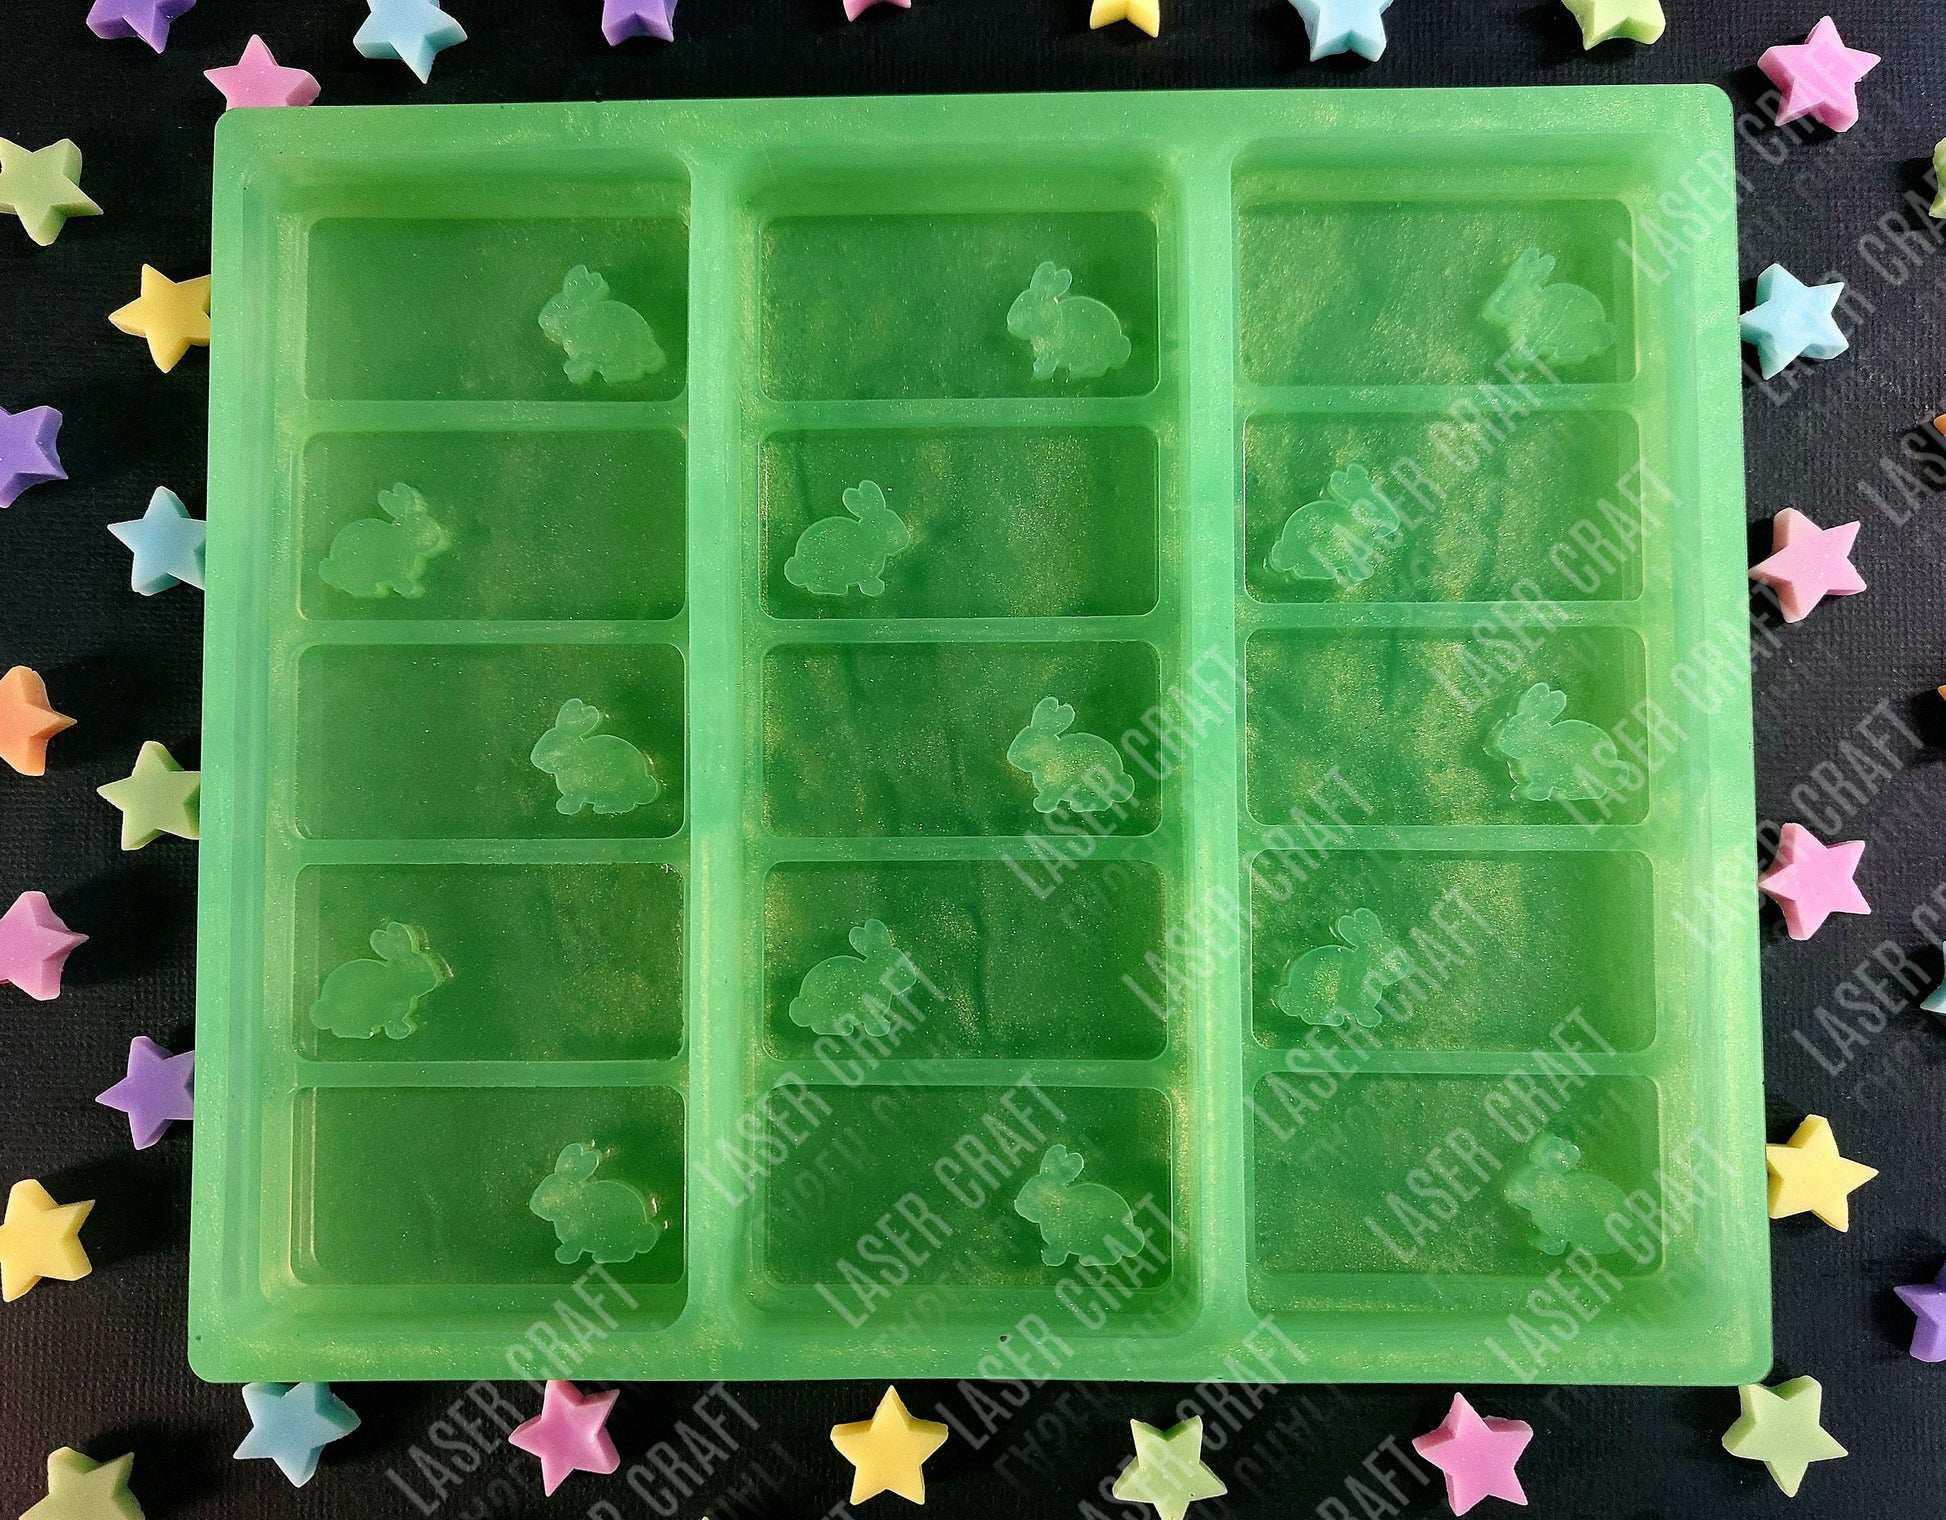 Bunny Triple Snap Bar Mould for wax